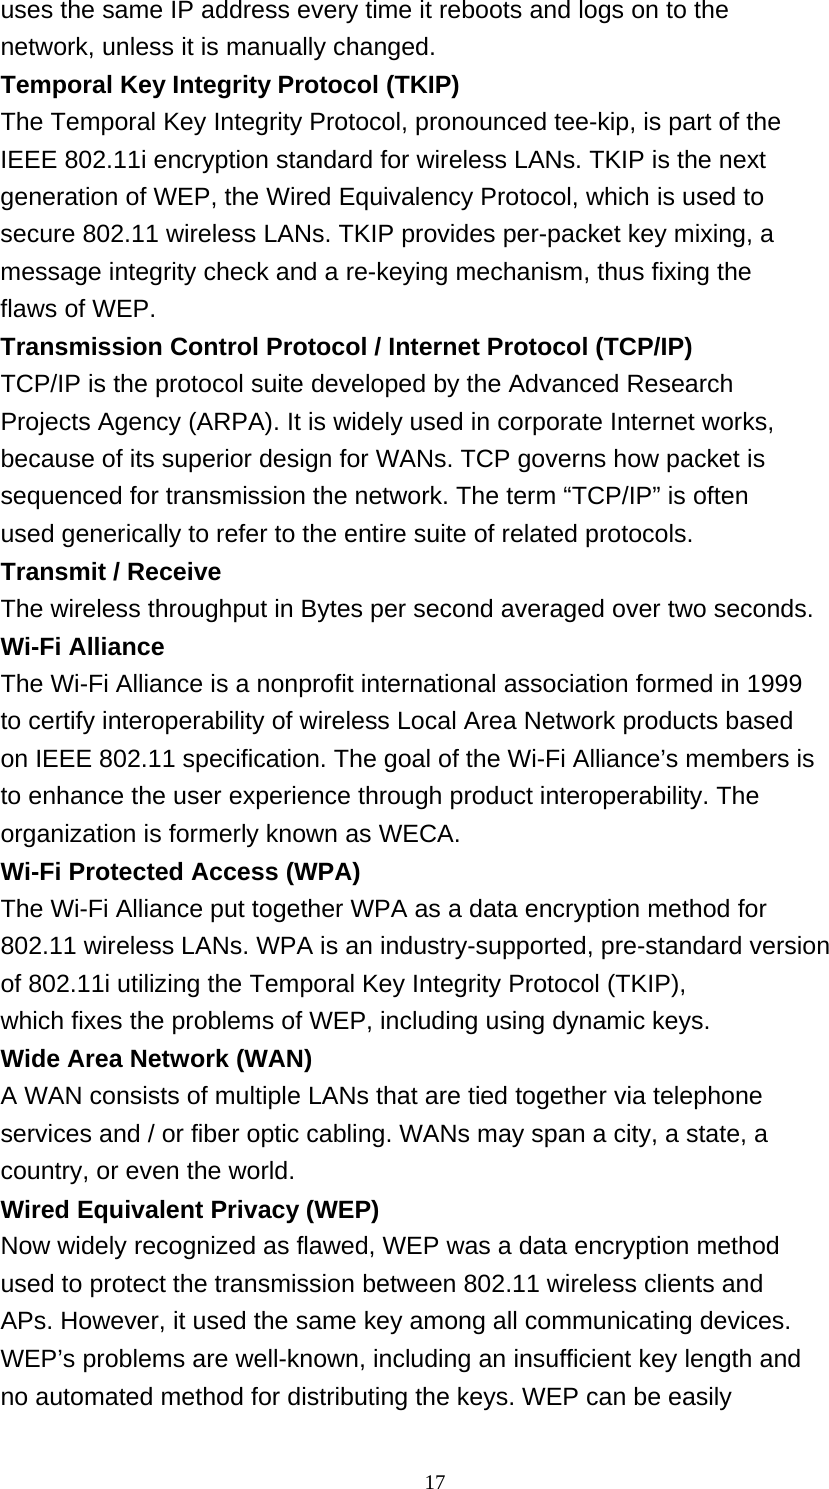 17  uses the same IP address every time it reboots and logs on to the network, unless it is manually changed. Temporal Key Integrity Protocol (TKIP) The Temporal Key Integrity Protocol, pronounced tee-kip, is part of the IEEE 802.11i encryption standard for wireless LANs. TKIP is the next generation of WEP, the Wired Equivalency Protocol, which is used to secure 802.11 wireless LANs. TKIP provides per-packet key mixing, a message integrity check and a re-keying mechanism, thus fixing the flaws of WEP. Transmission Control Protocol / Internet Protocol (TCP/IP) TCP/IP is the protocol suite developed by the Advanced Research Projects Agency (ARPA). It is widely used in corporate Internet works, because of its superior design for WANs. TCP governs how packet is sequenced for transmission the network. The term “TCP/IP” is often used generically to refer to the entire suite of related protocols. Transmit / Receive The wireless throughput in Bytes per second averaged over two seconds. Wi-Fi Alliance The Wi-Fi Alliance is a nonprofit international association formed in 1999 to certify interoperability of wireless Local Area Network products based on IEEE 802.11 specification. The goal of the Wi-Fi Alliance’s members is to enhance the user experience through product interoperability. The organization is formerly known as WECA. Wi-Fi Protected Access (WPA) The Wi-Fi Alliance put together WPA as a data encryption method for 802.11 wireless LANs. WPA is an industry-supported, pre-standard version of 802.11i utilizing the Temporal Key Integrity Protocol (TKIP), which fixes the problems of WEP, including using dynamic keys. Wide Area Network (WAN) A WAN consists of multiple LANs that are tied together via telephone services and / or fiber optic cabling. WANs may span a city, a state, a country, or even the world. Wired Equivalent Privacy (WEP) Now widely recognized as flawed, WEP was a data encryption method used to protect the transmission between 802.11 wireless clients and APs. However, it used the same key among all communicating devices. WEP’s problems are well-known, including an insufficient key length and no automated method for distributing the keys. WEP can be easily 